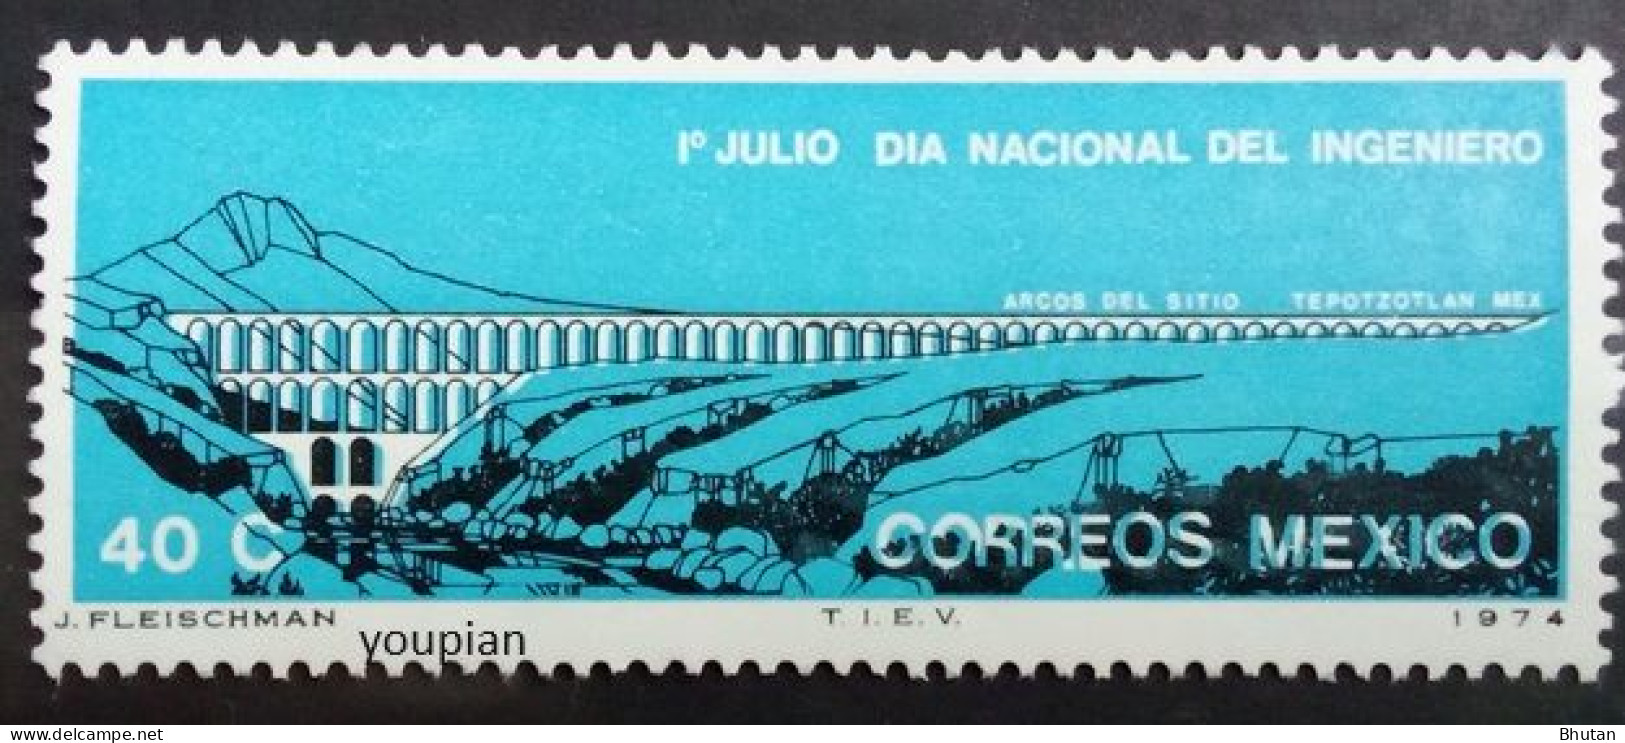 Mexico 1974, Day Of The Engineer, MNH Single Stamp - Messico